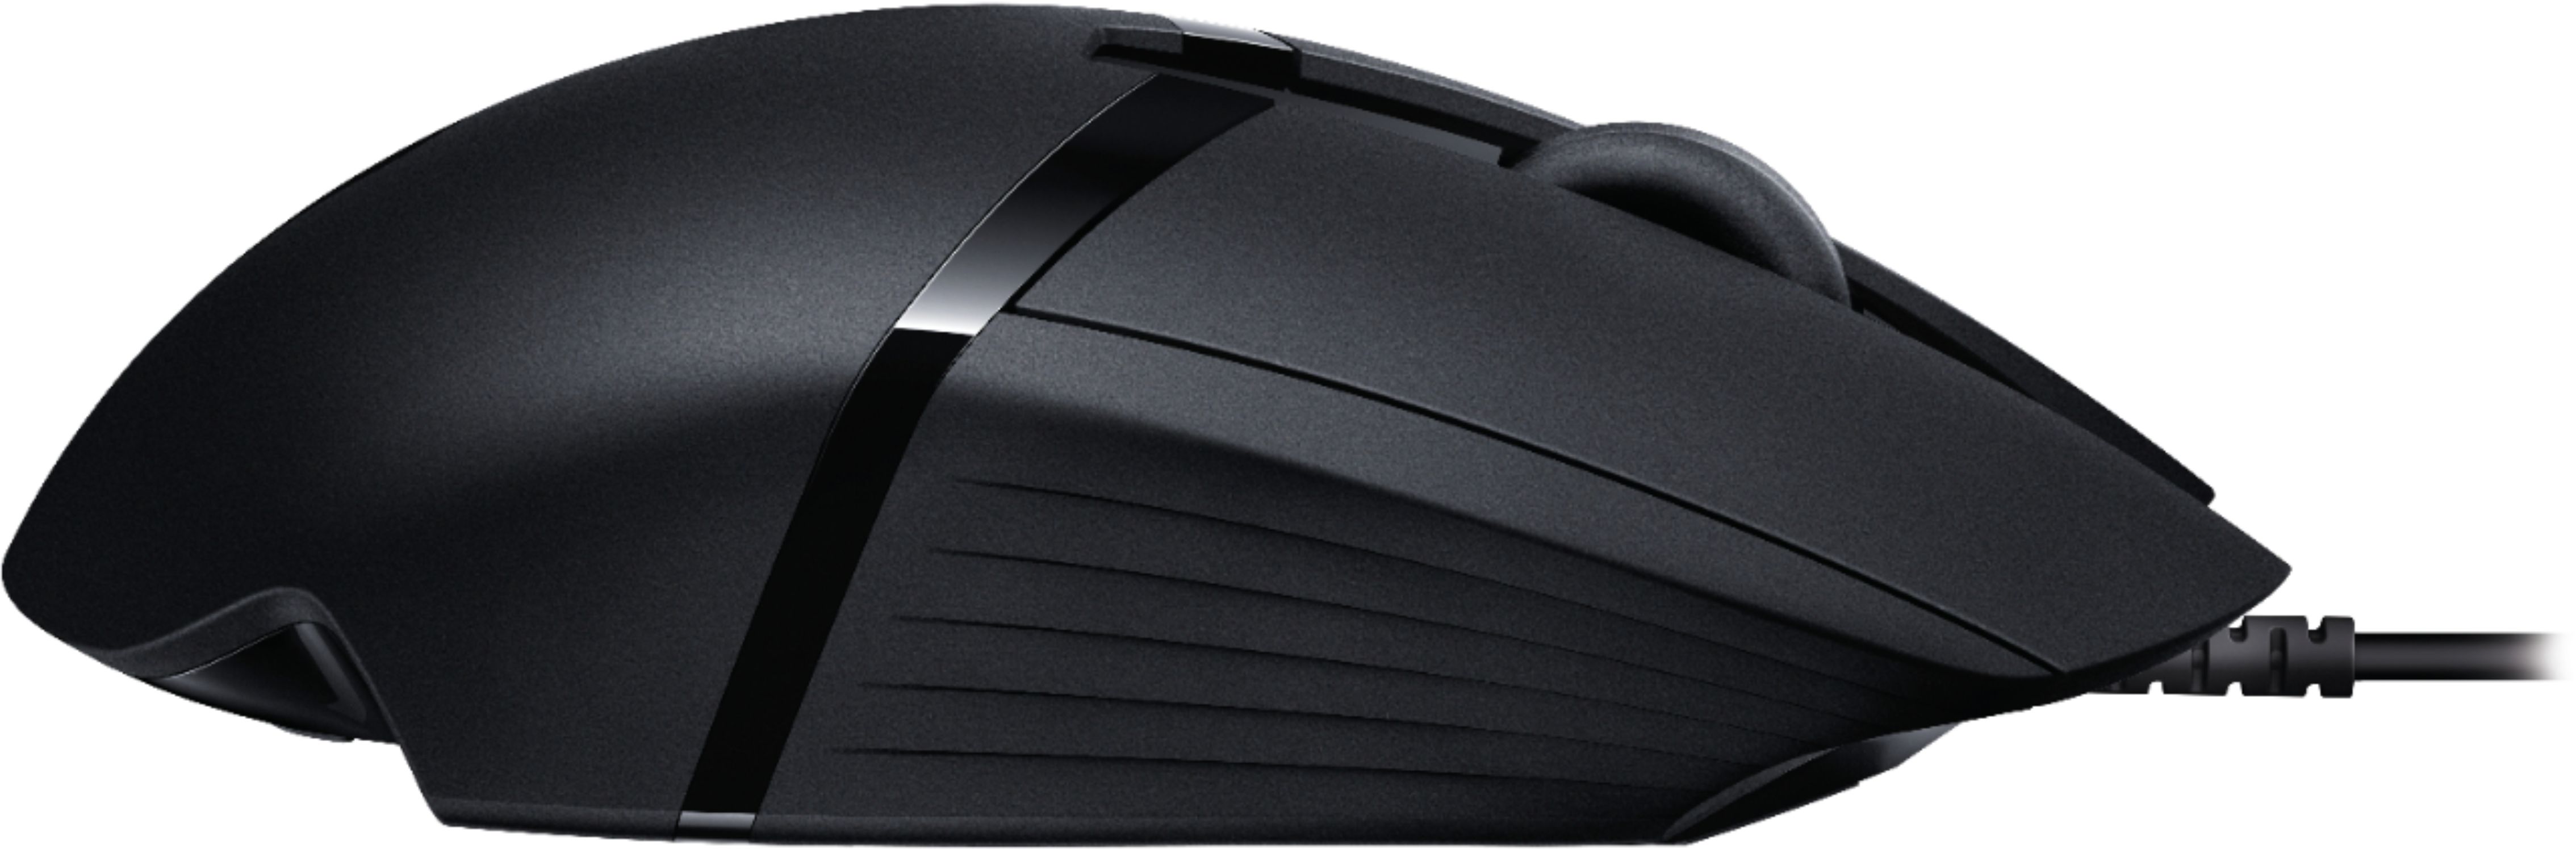 Best Buy: Logitech G402 Hyperion Fury Optical Gaming Mouse Black 910-004069